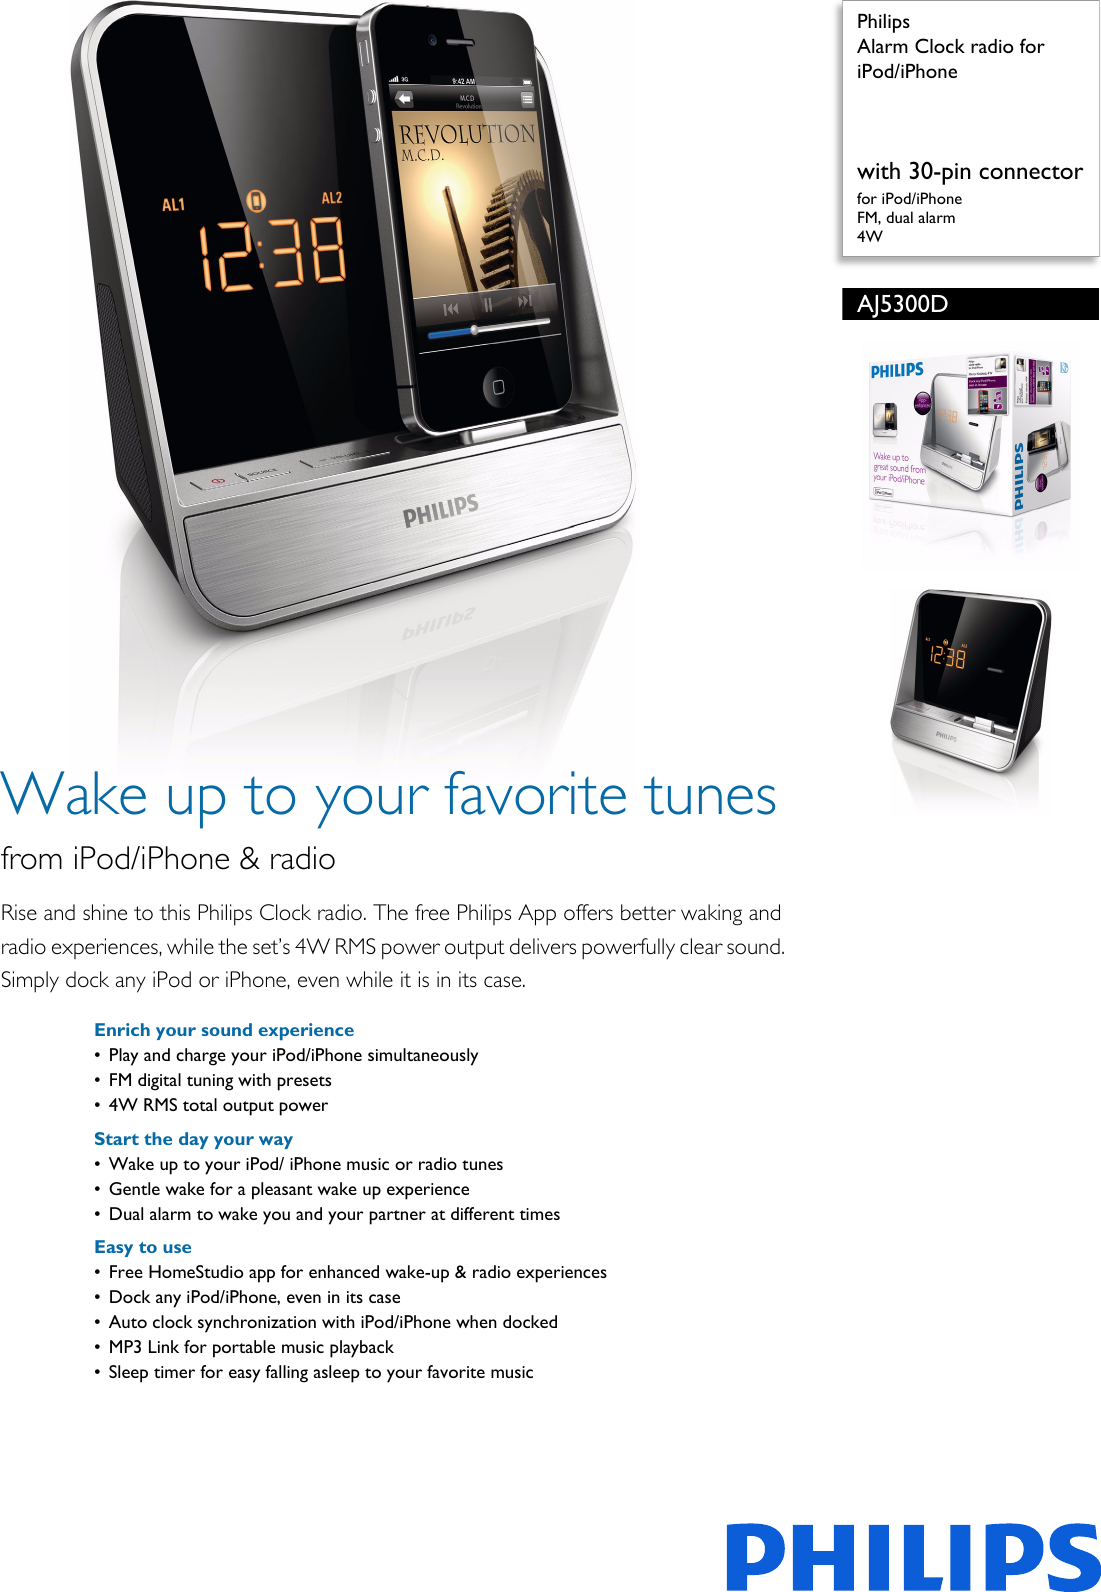 Page 1 of 3 - Philips AJ5300D/37 Alarm Clock Radio For IPod/iPhone User Manual Leaflet Aj5300d 37 Pss Aenca